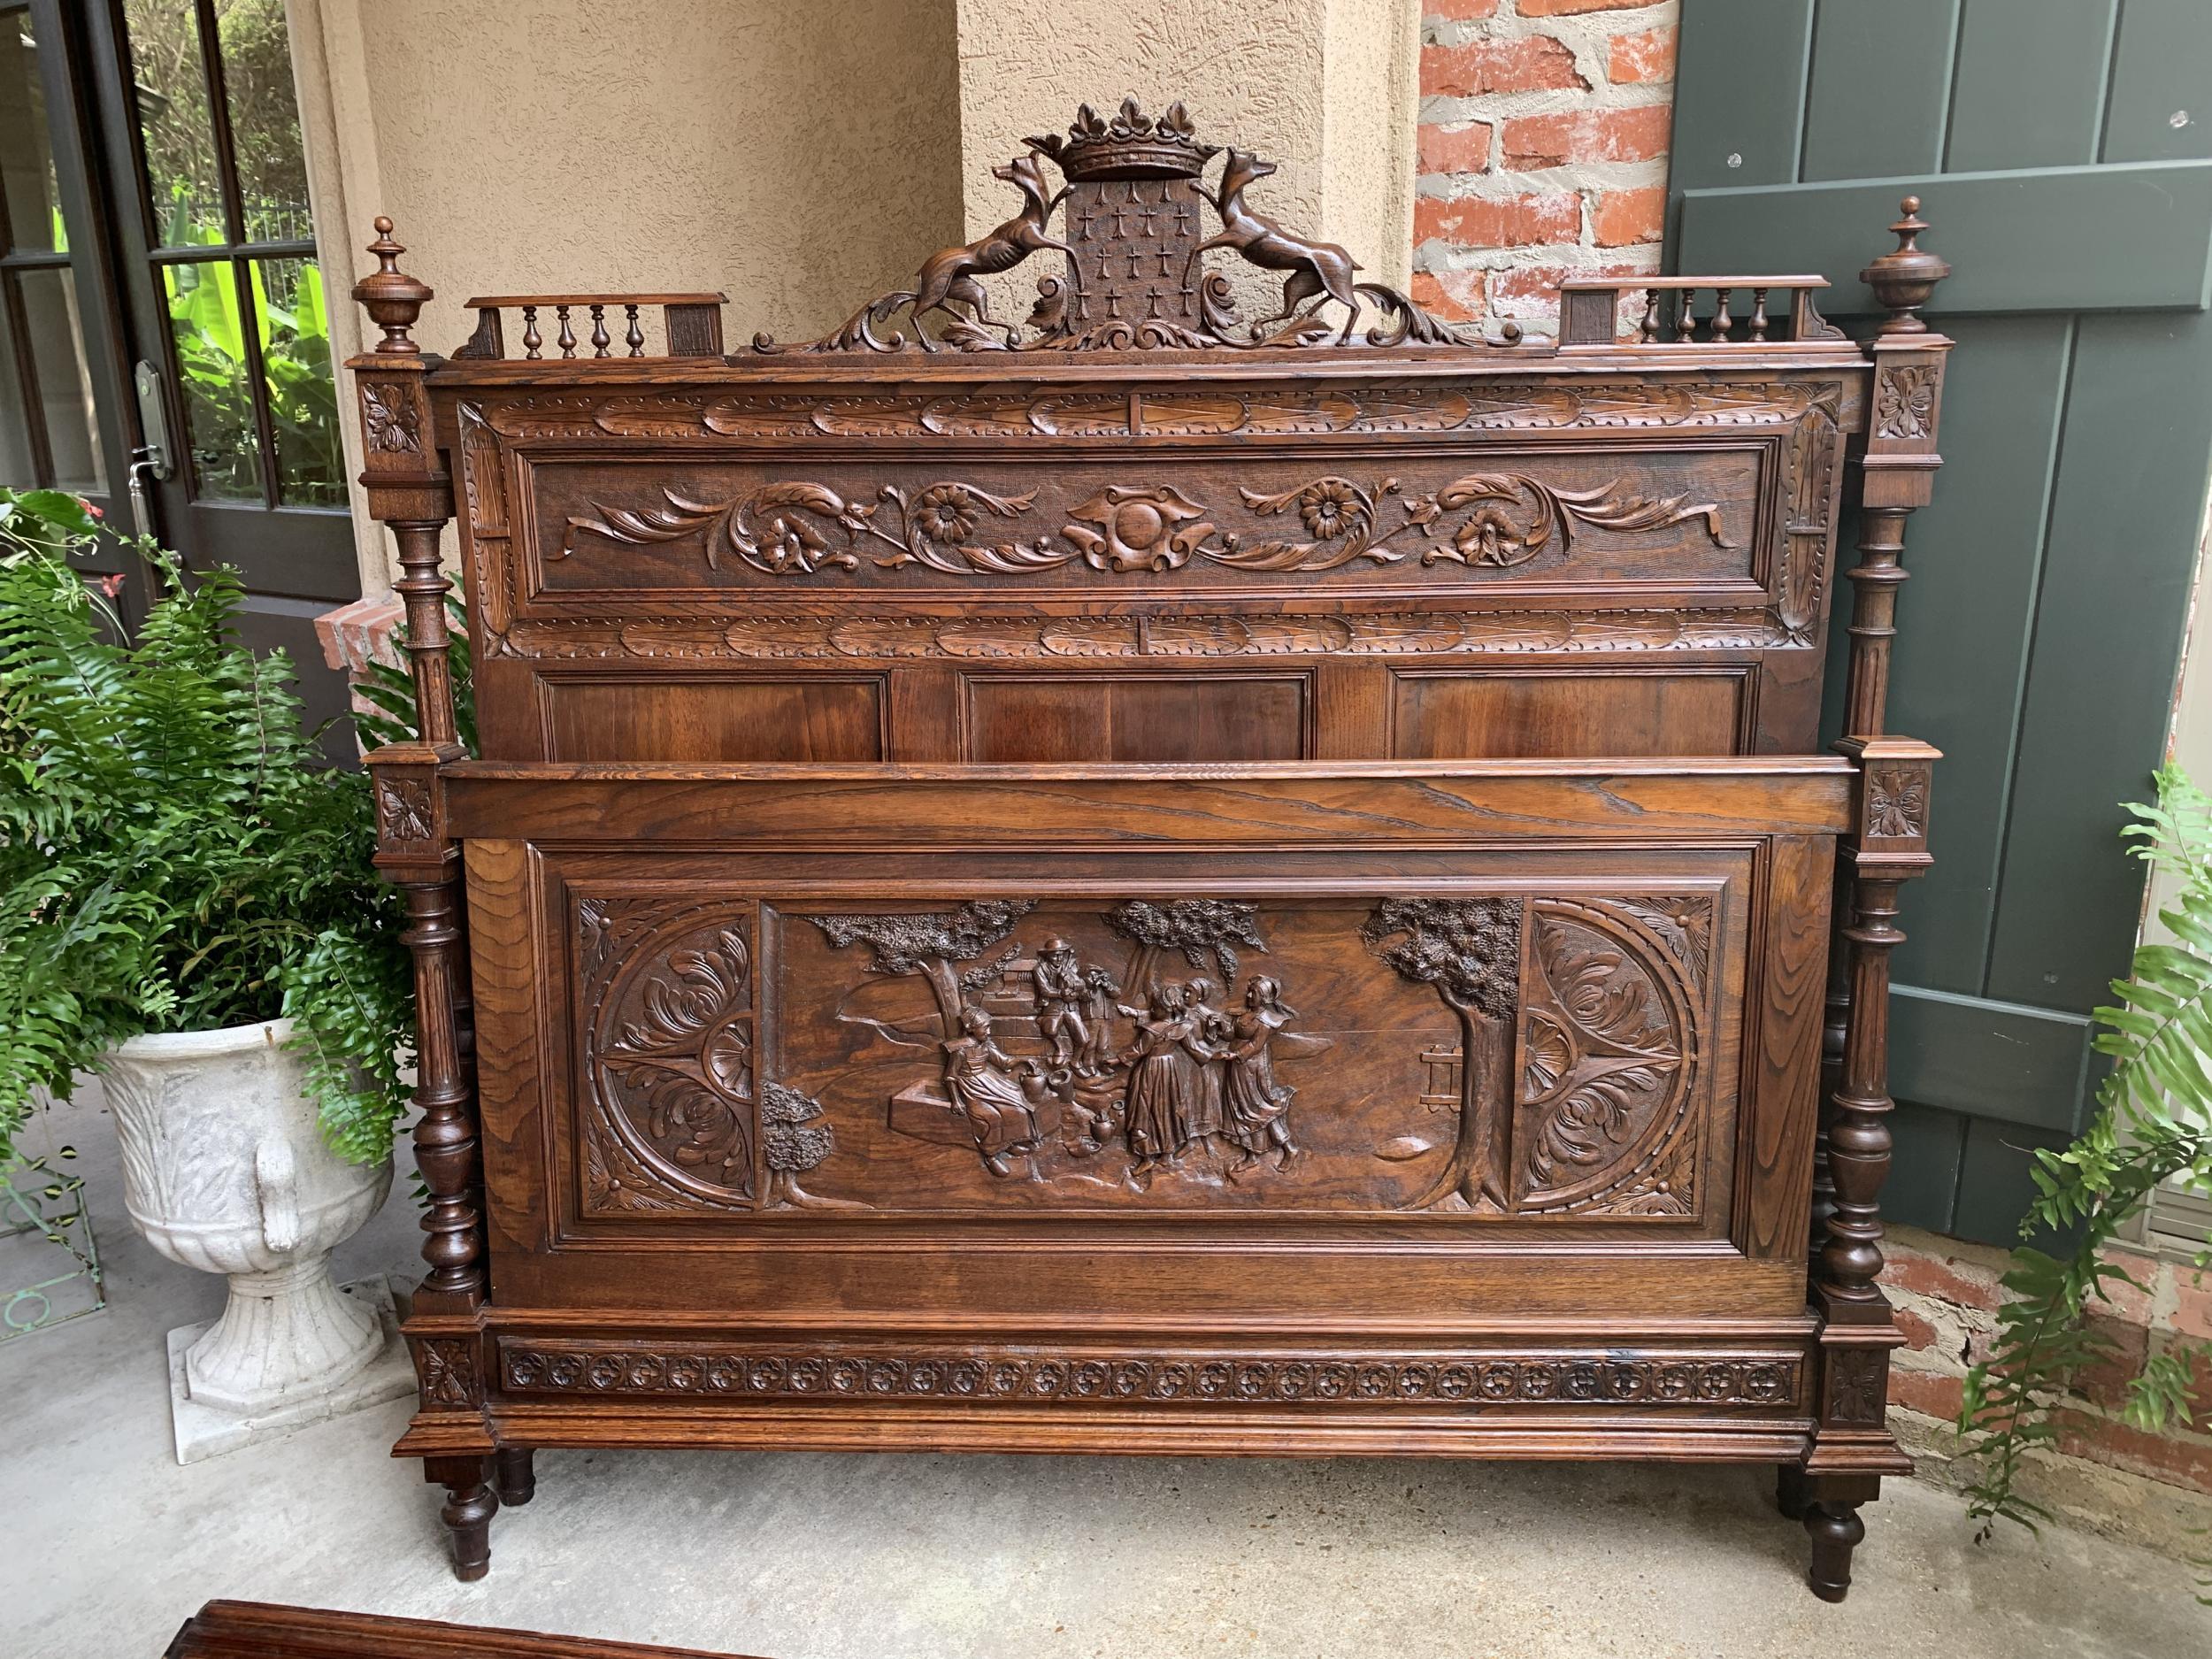 French Provincial 19th Century Antique French Breton Carved Oak Bed Duke of Brittany Coat of Arms